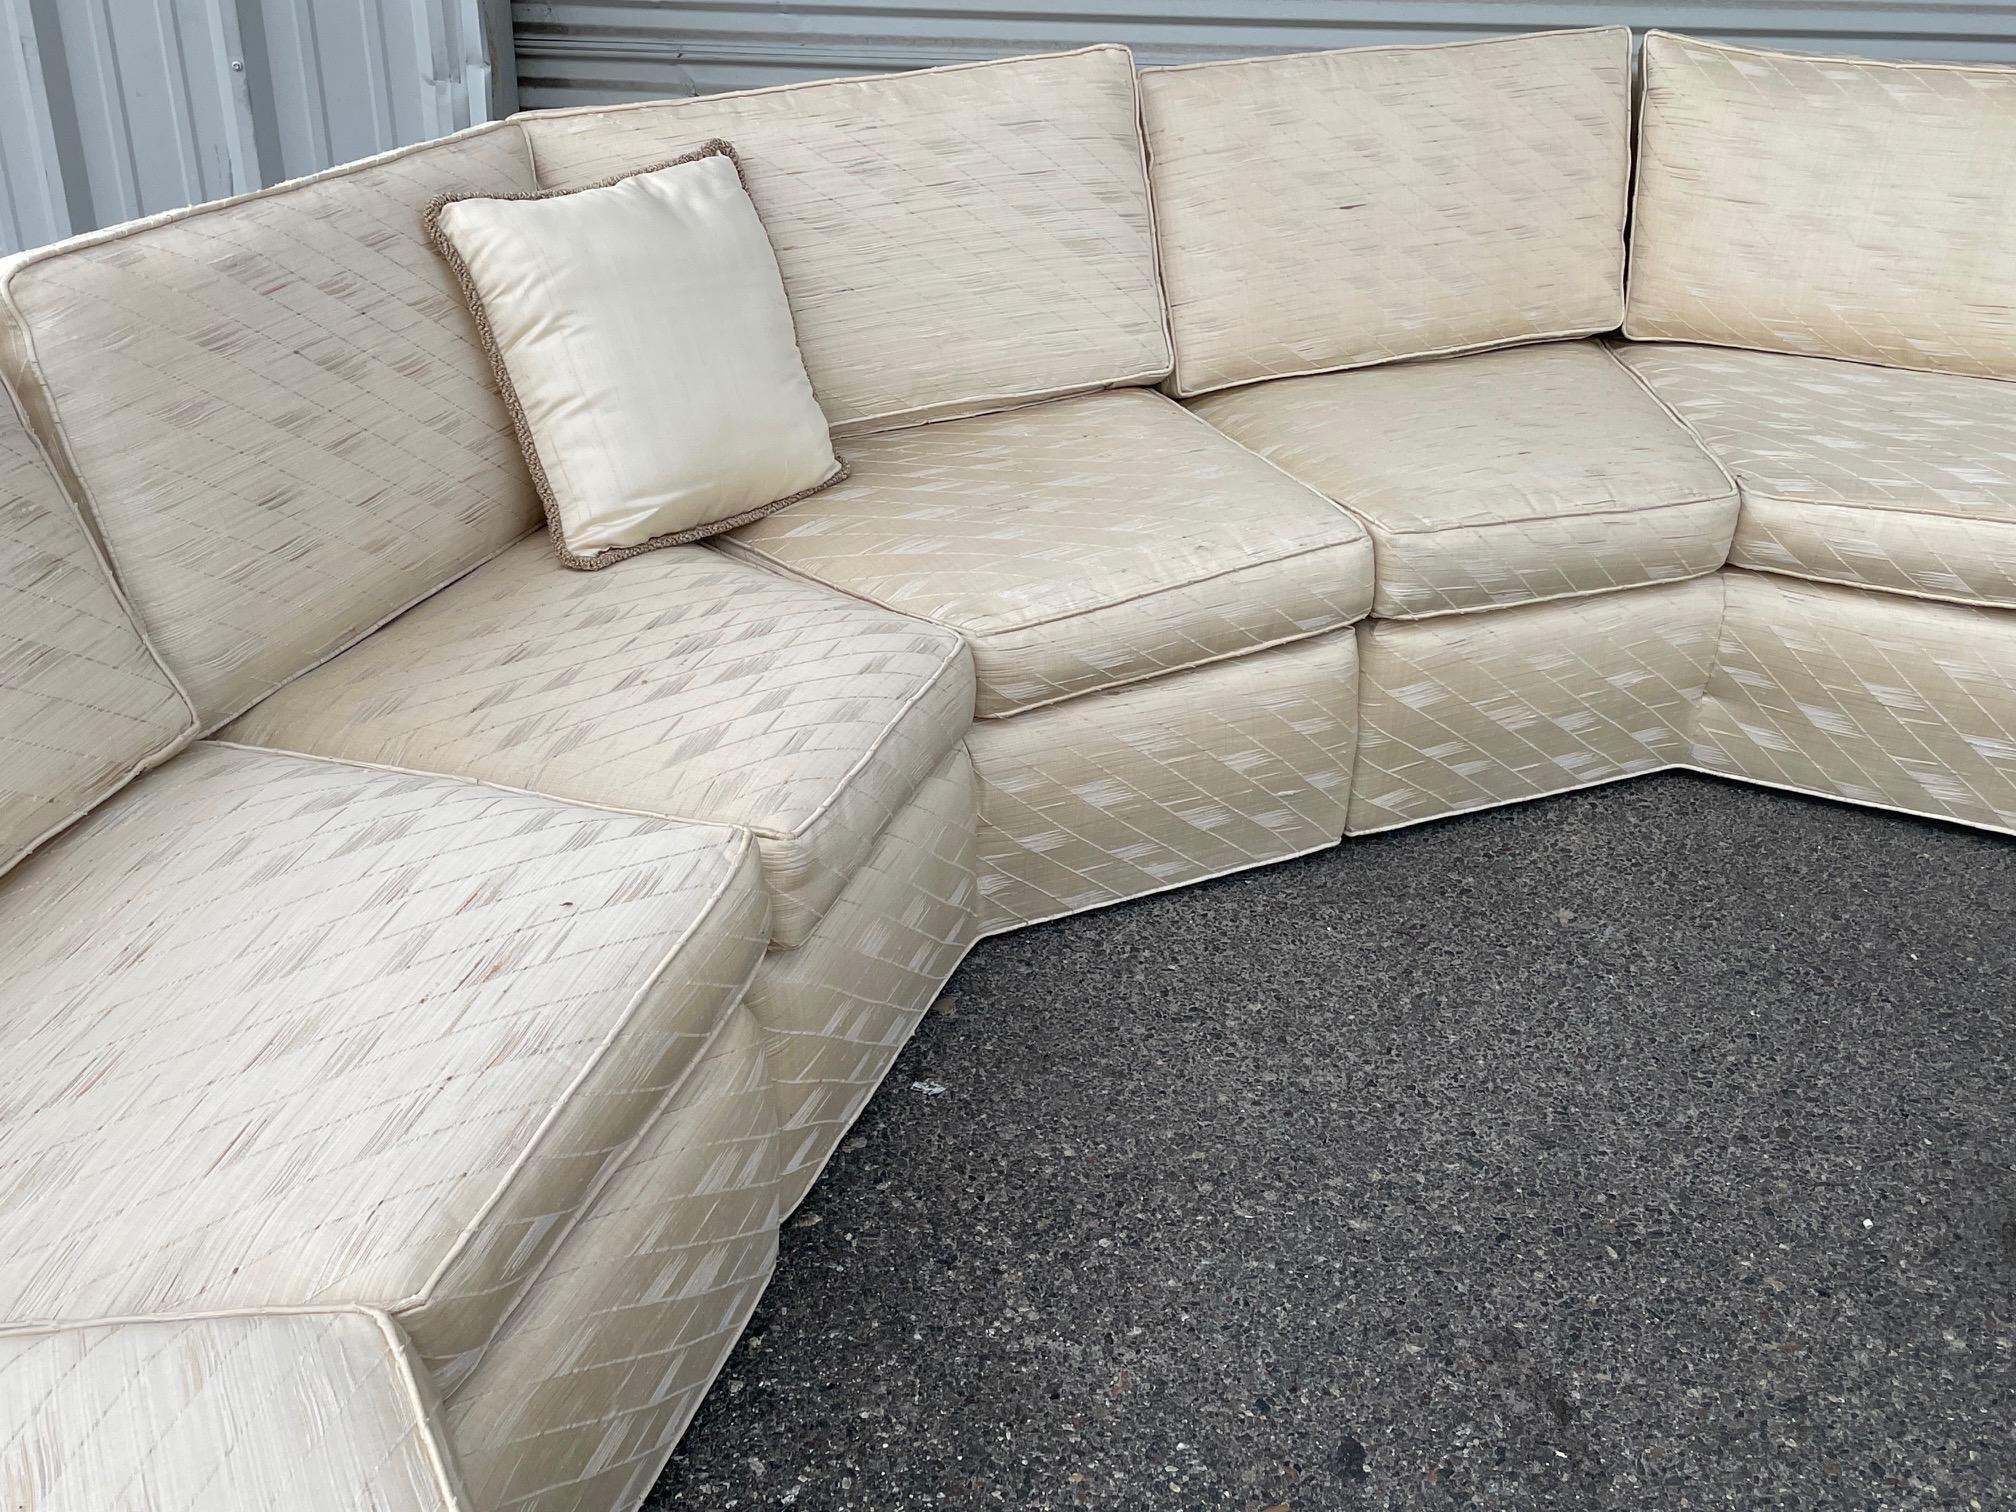 Large Hollywood Regency sofa in the style of Milo Baughman features five pieces in a geometrical curved form. Maker's label is no longer present. For transport purposes, each section measures approx. 56